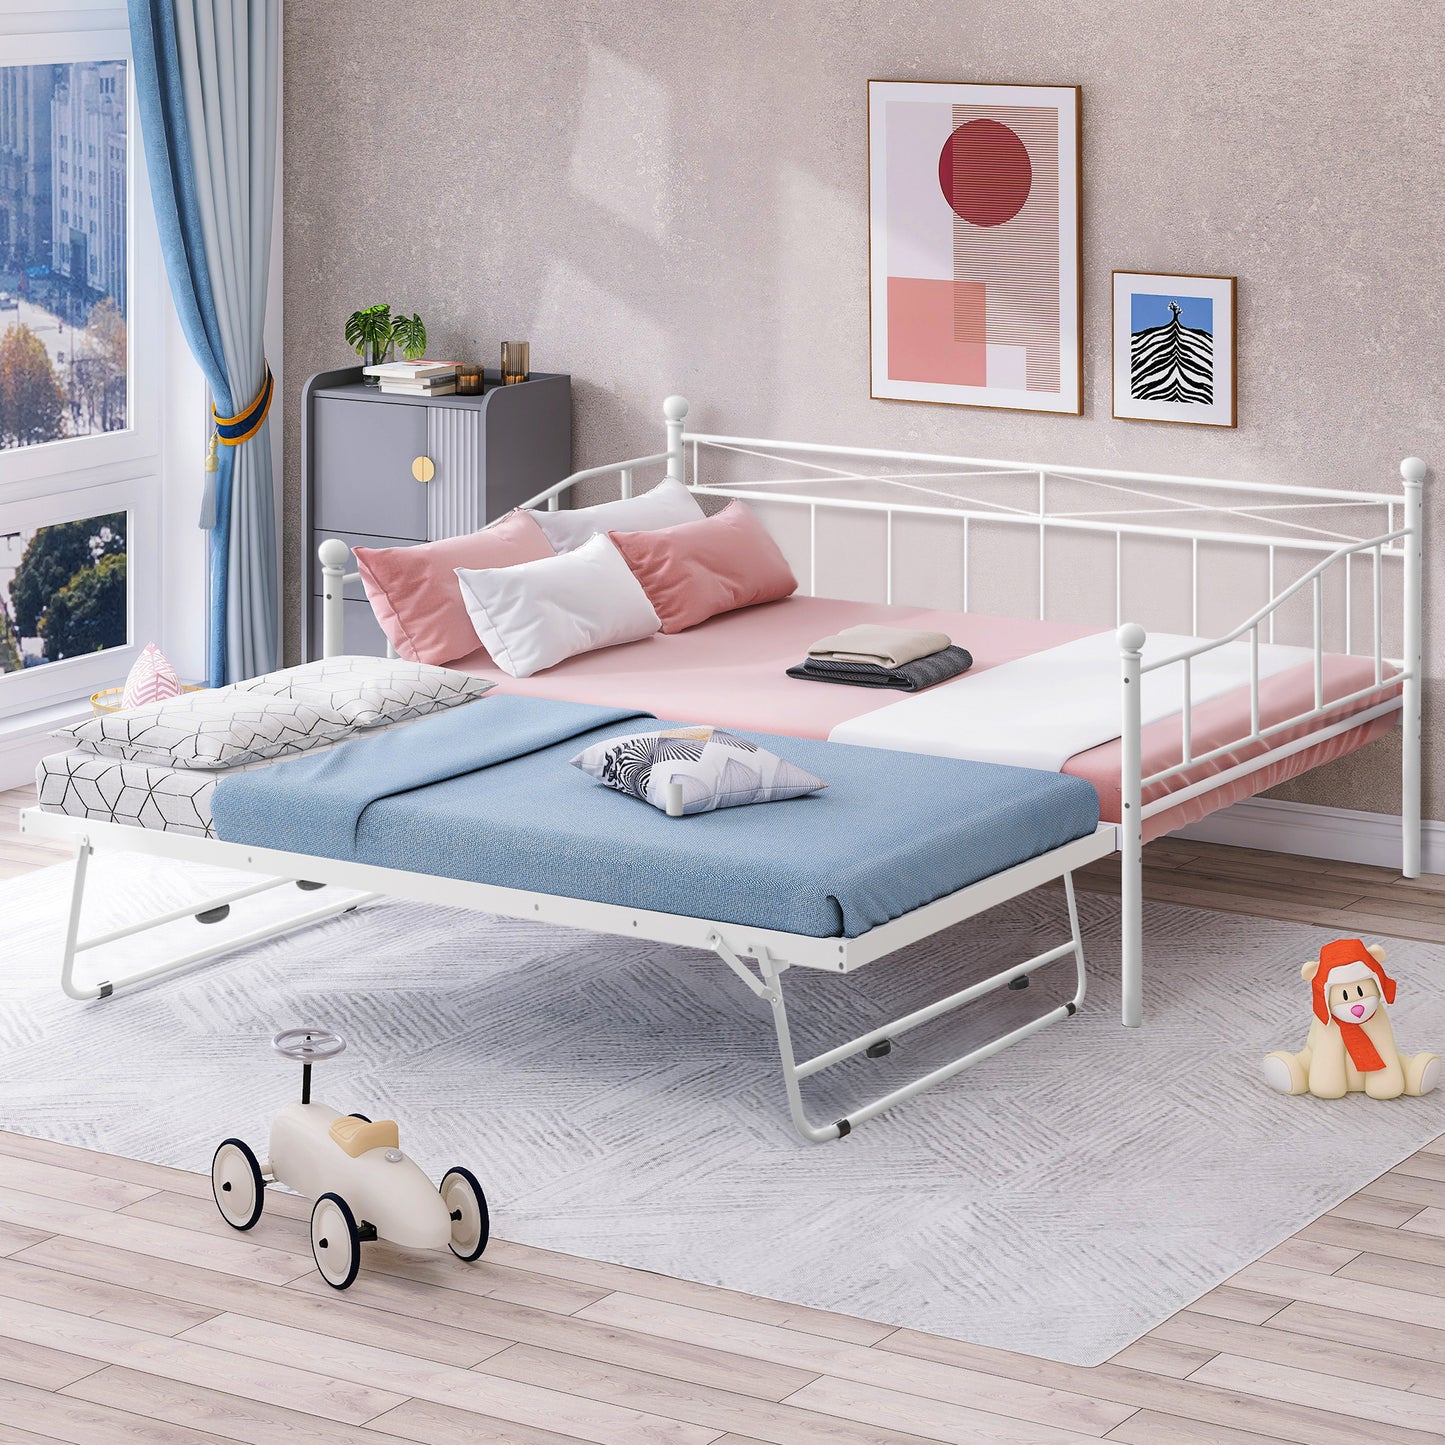 SYNGAR Daybed with Trundle, Twin Size Metal Daybed with Pop Up Trundle, Sofa Bed Day Beds Frame, Bedroom Living Room Furniture for Kids Boys Girls Adults Guest, White